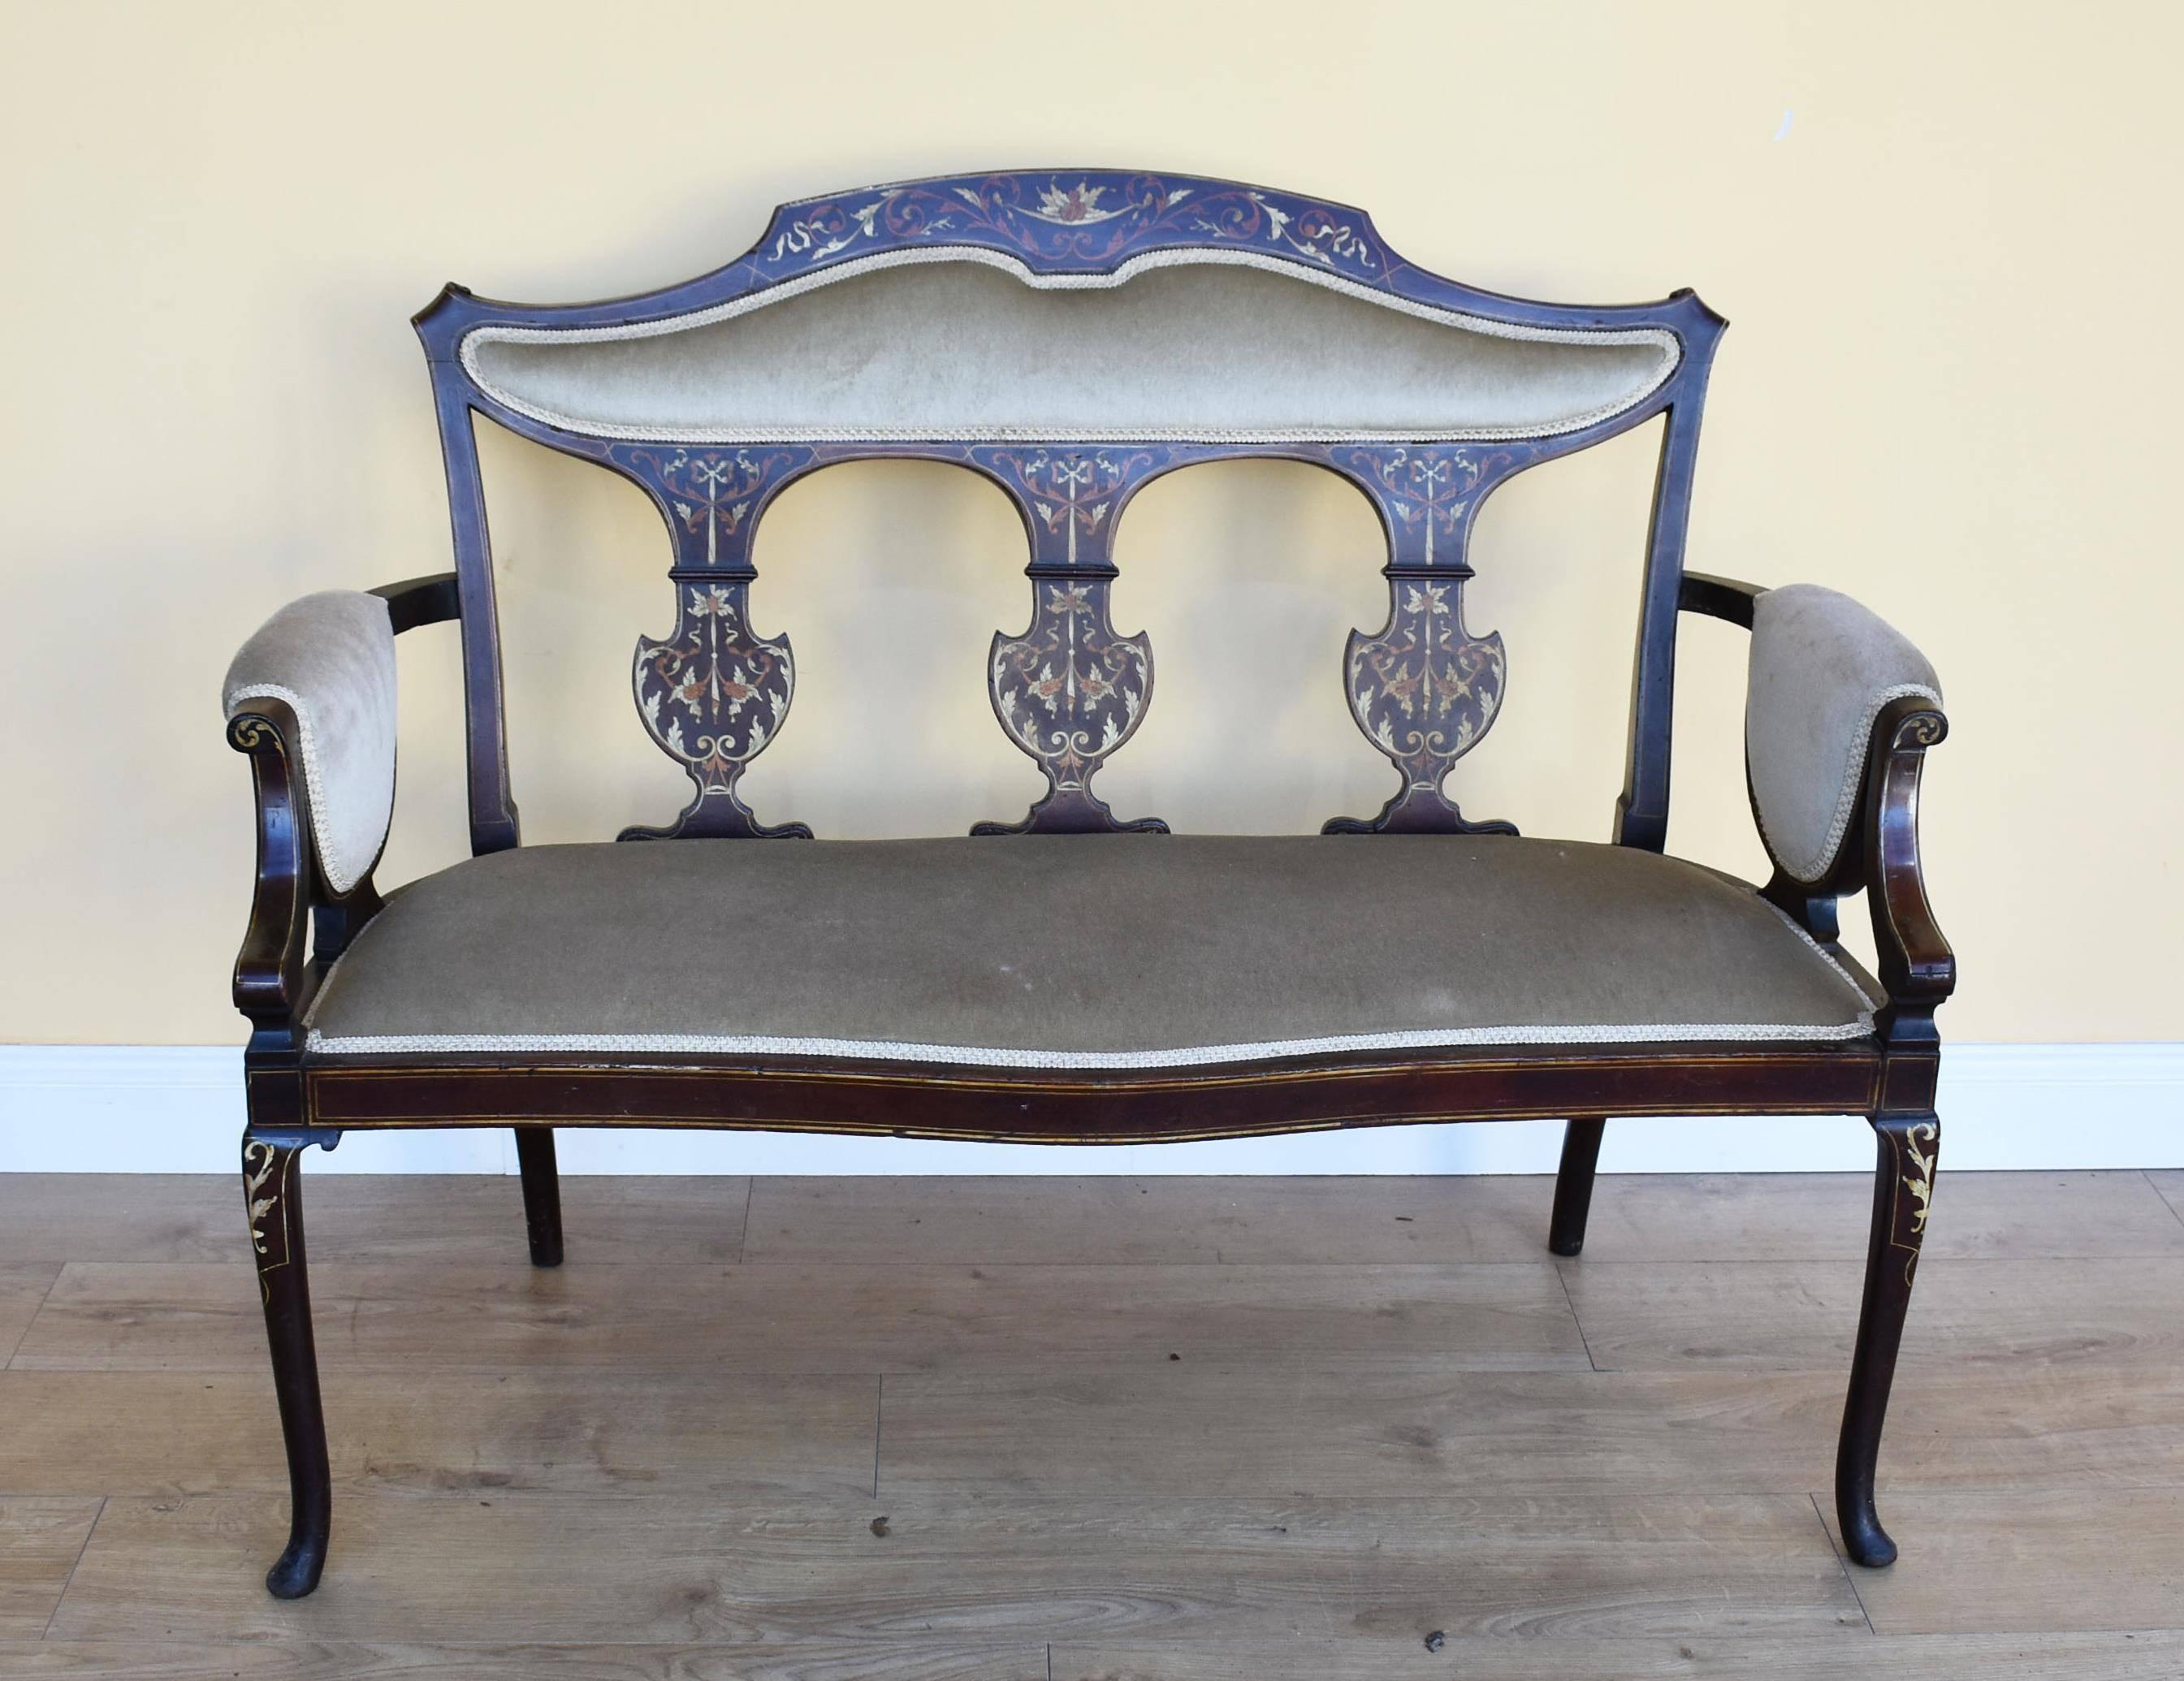 Edwardian mahogany inlaid sofa/hall seat (by James Shoolbred & Co London) in nice condition with decorative inlay to the back and legs, upholstered in a light grey velvet fabric standing on cabriol legs.

Dimensions: Width 47.5 inches x Height